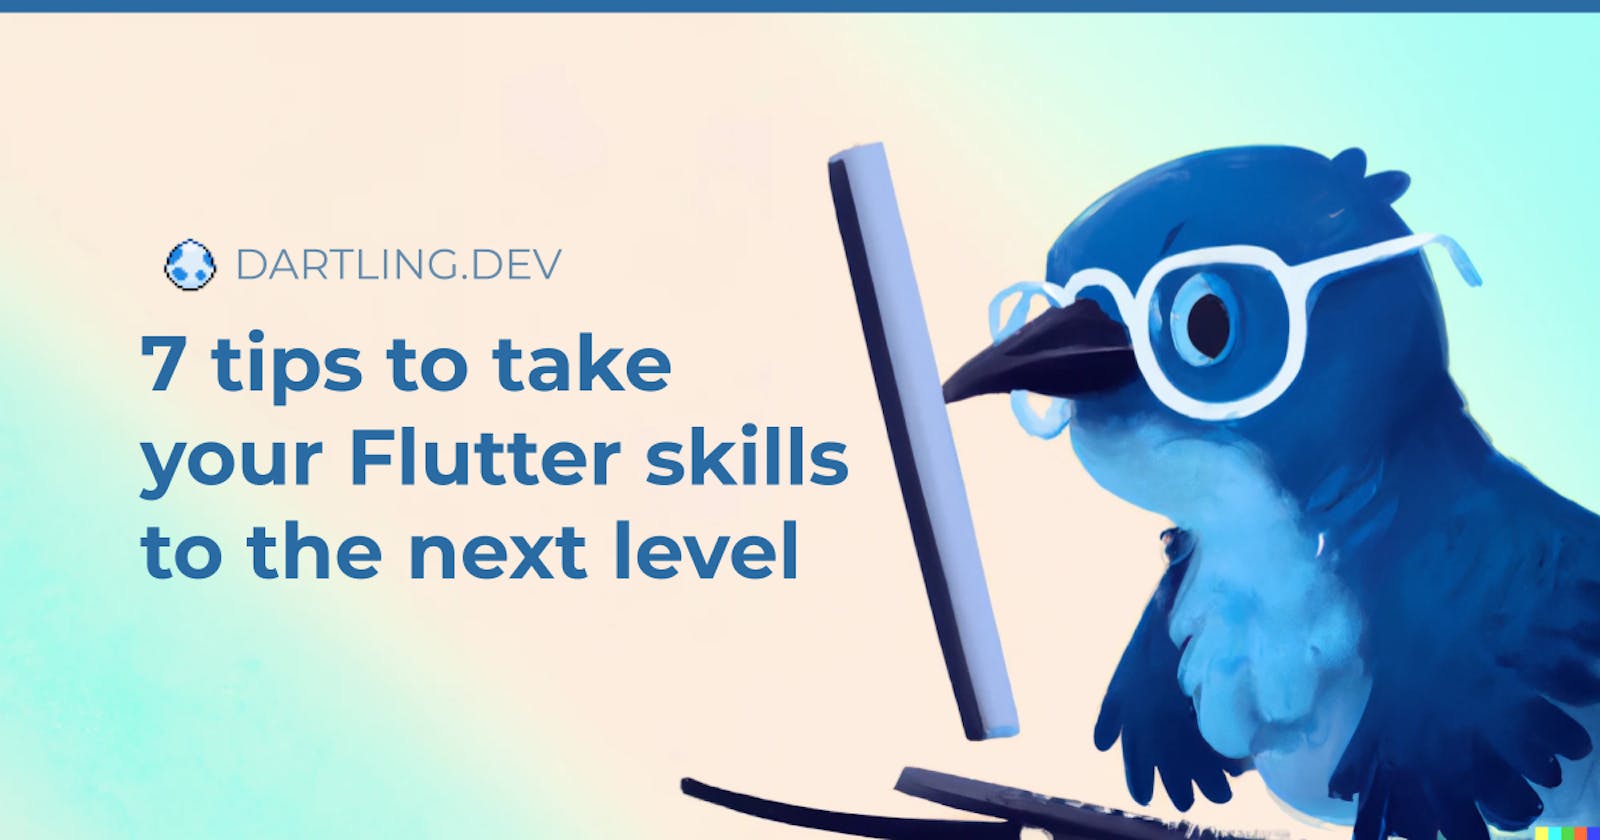 7 tips to take your Flutter skills to the next level